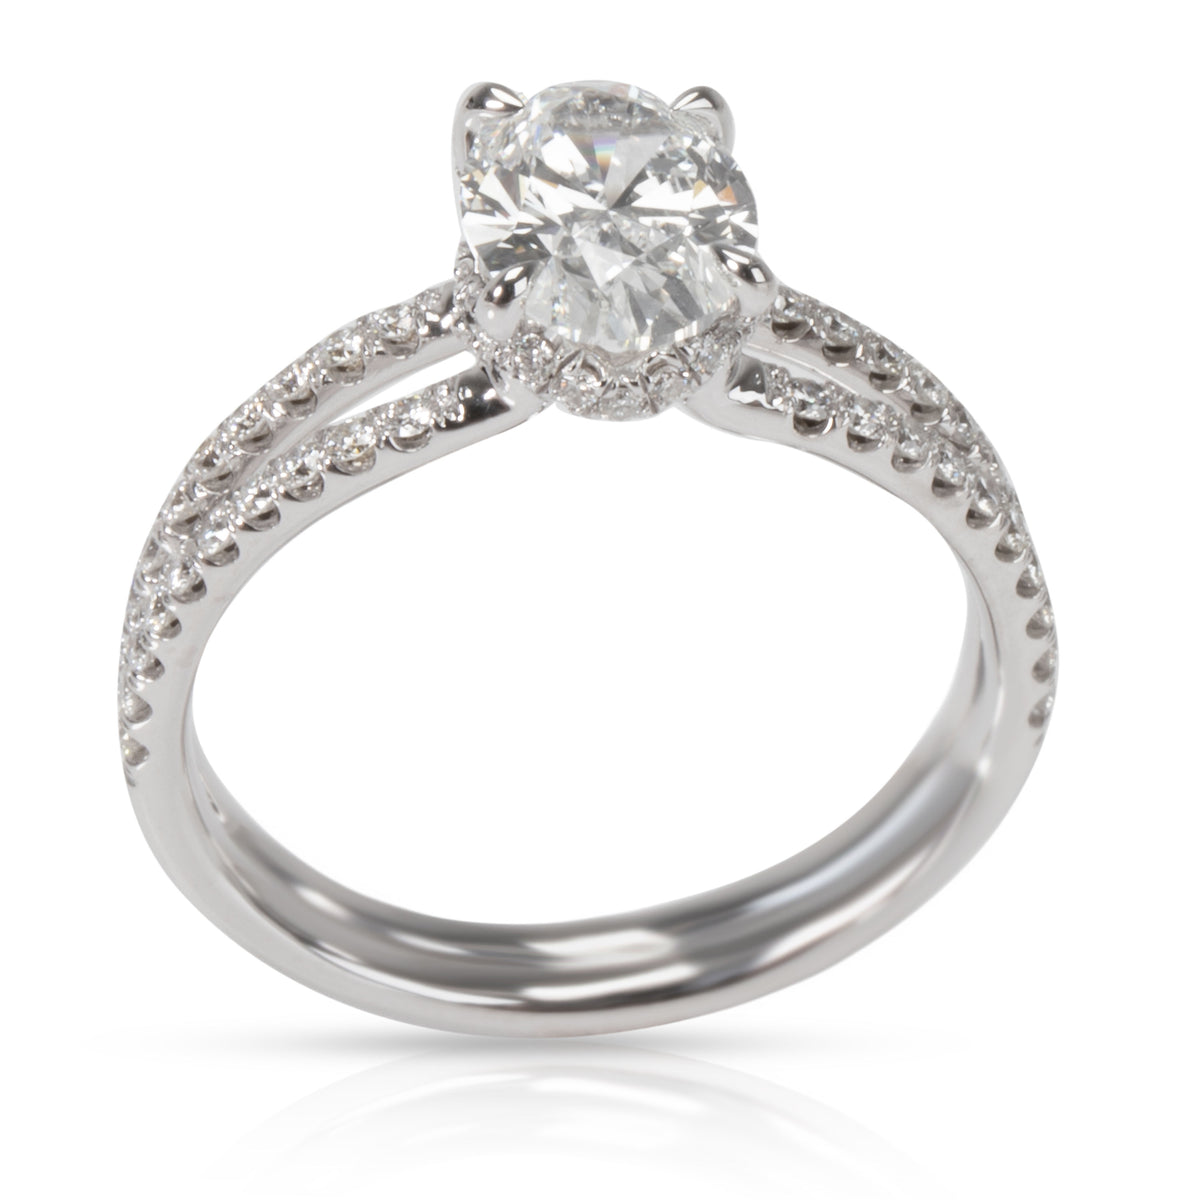 James Allen Oval Diamond Engagement Ring in 14K White Gold GIA H IF 1.34 CTW